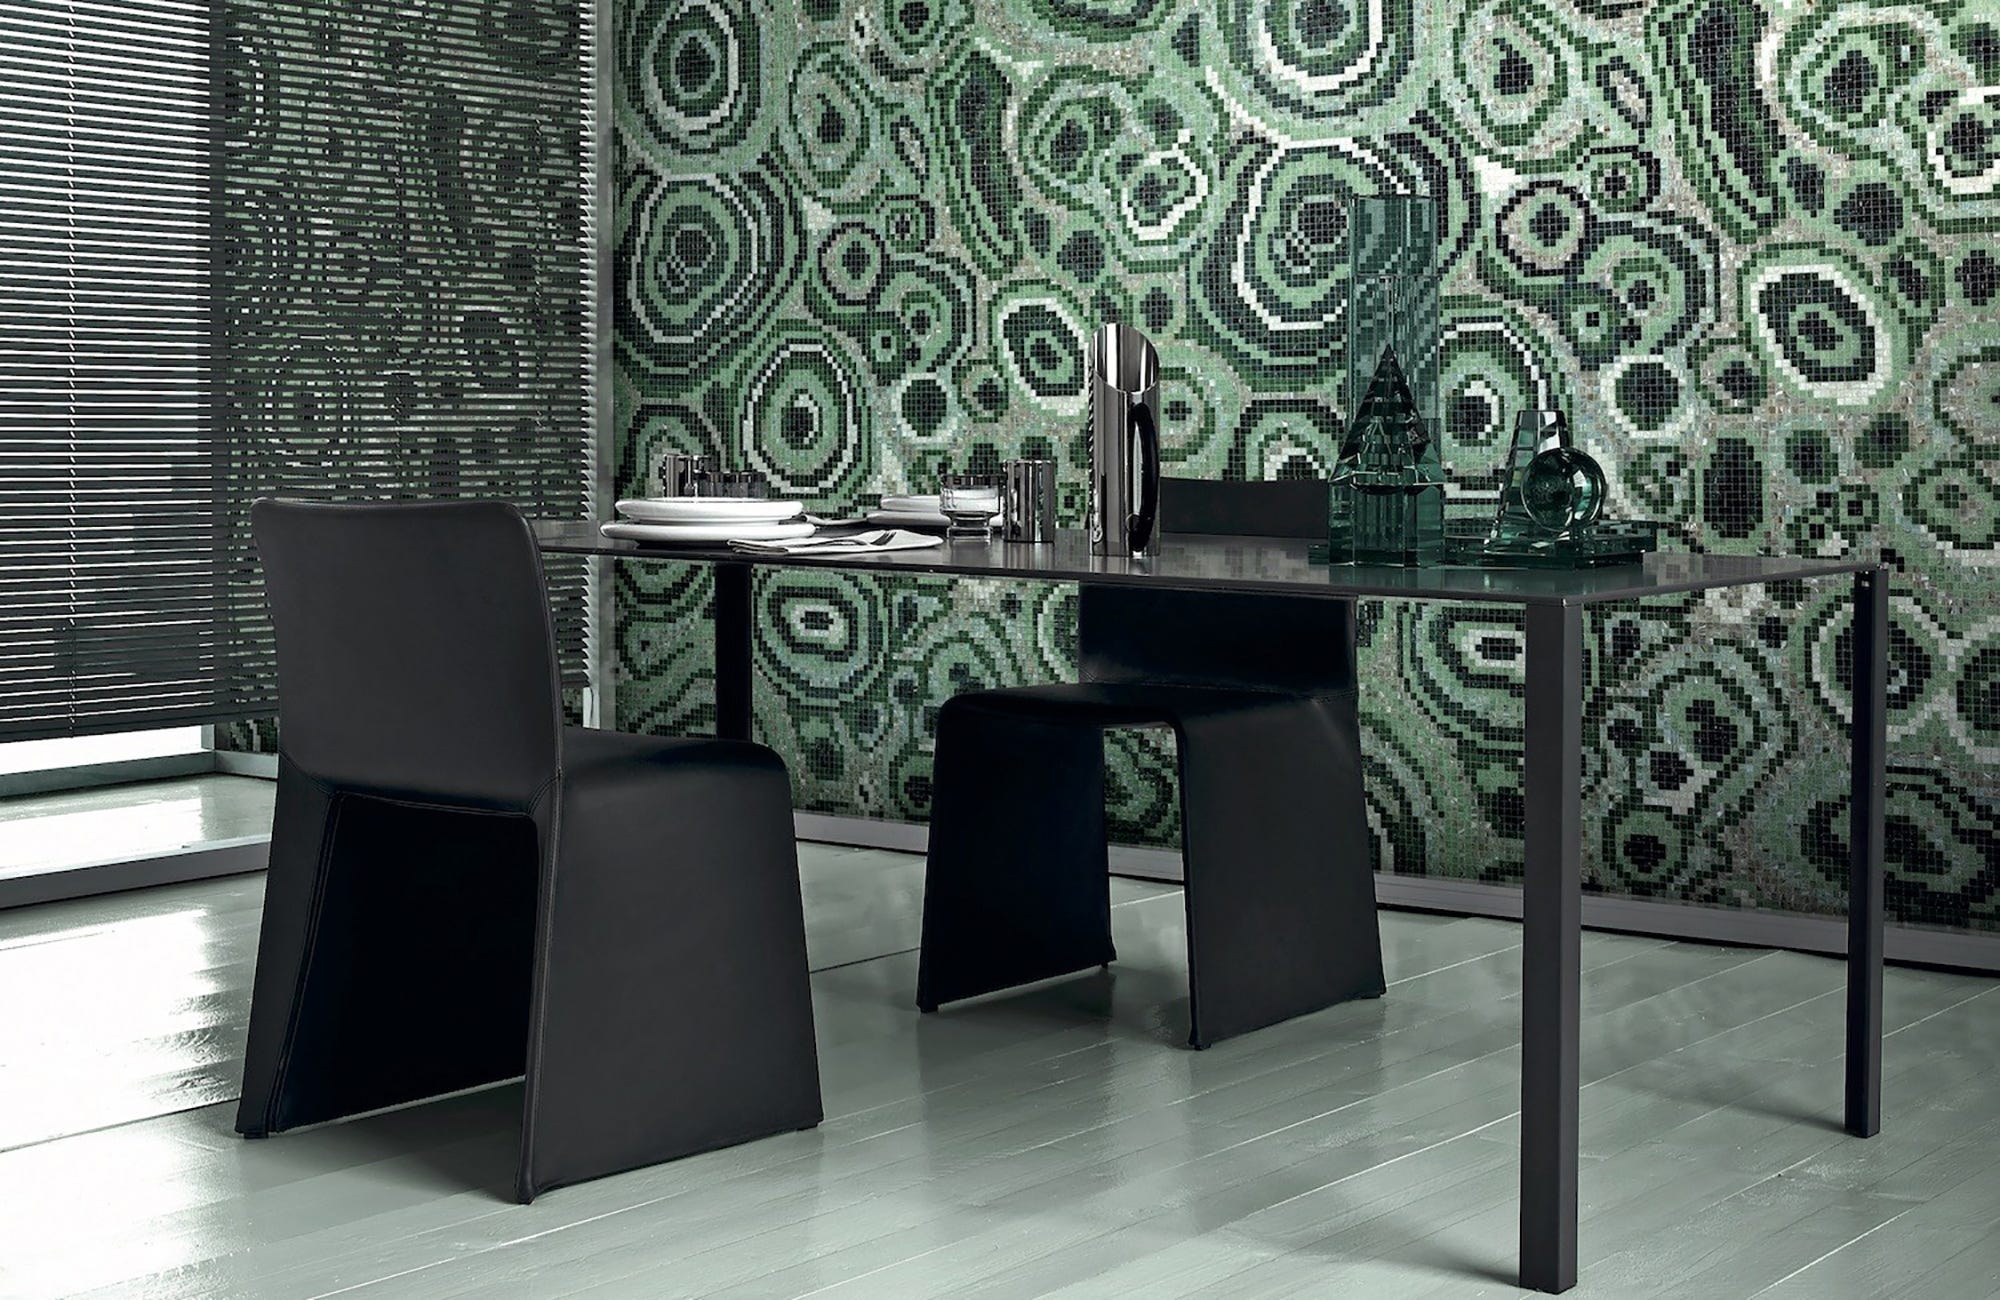 Natale's New Malachite design for Bisazza is made up of tiny glass mosaics, but the vivid radiating swirls are big on a feature wall.